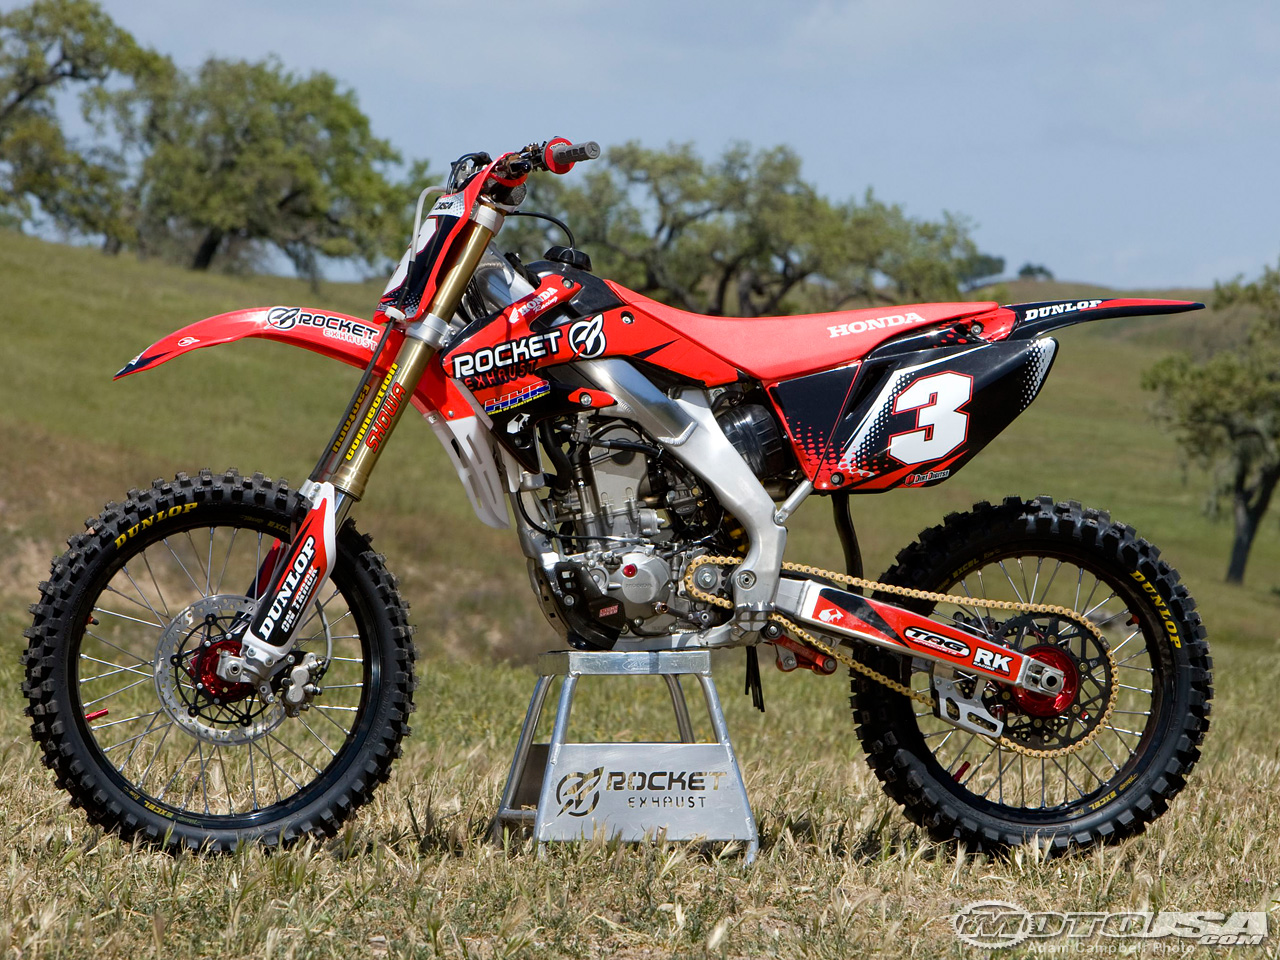 2007 honda crf250r for sale There is no rubberized coating or padding which...